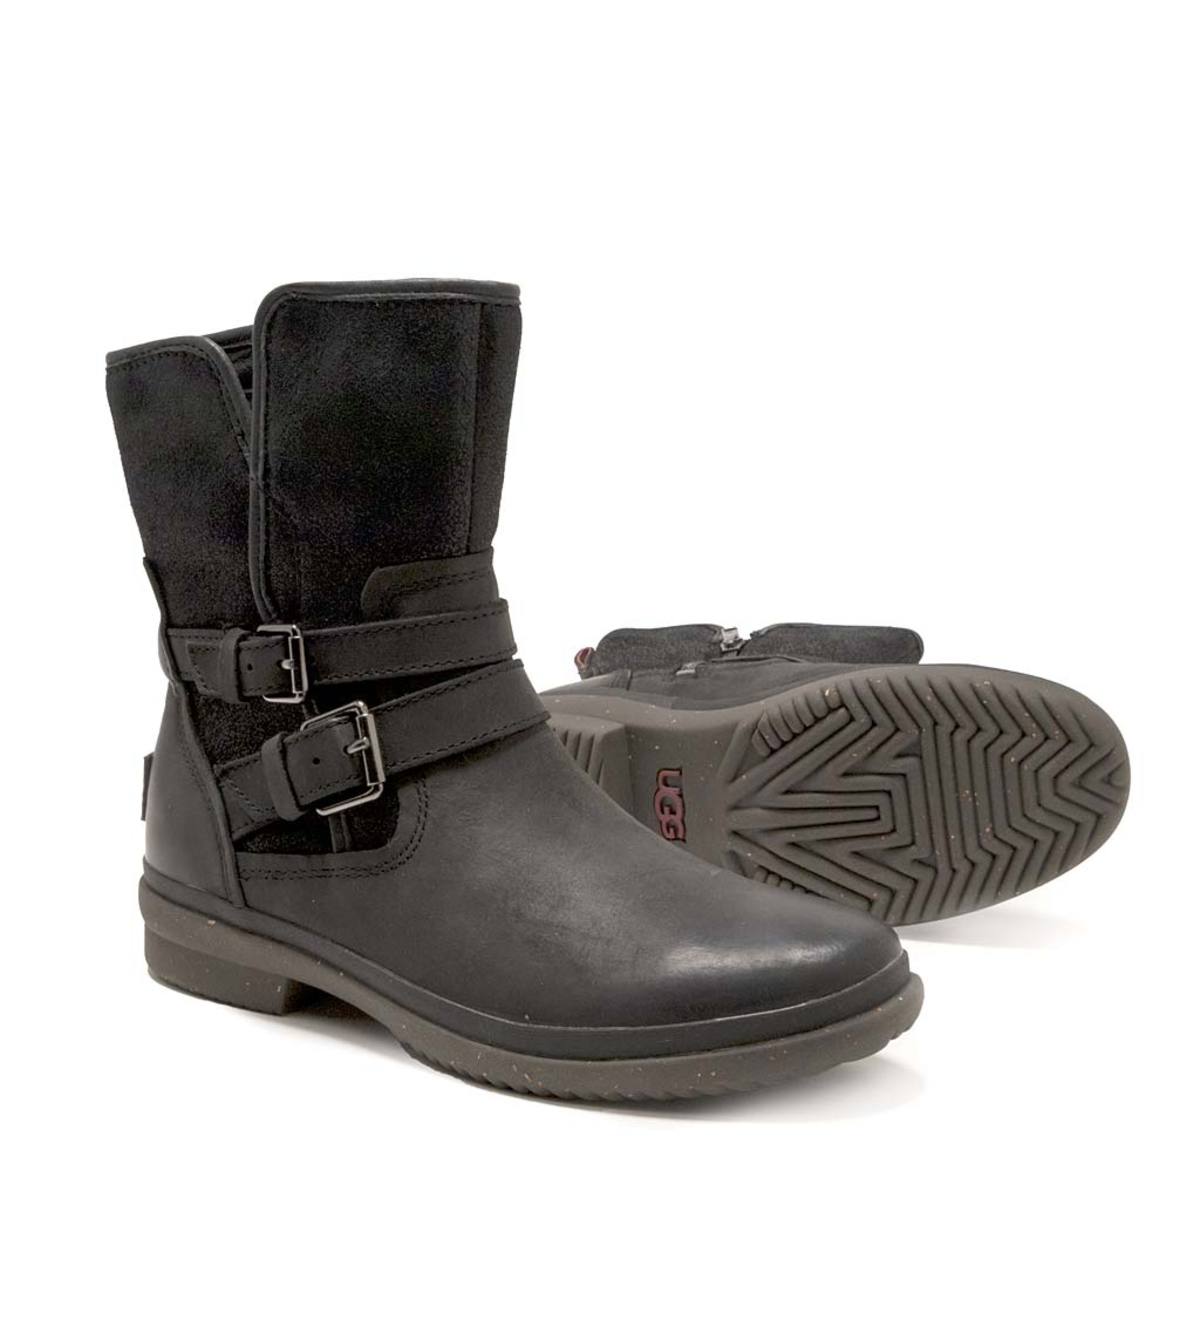 UGG Simmens Boot - Black - Size 6 